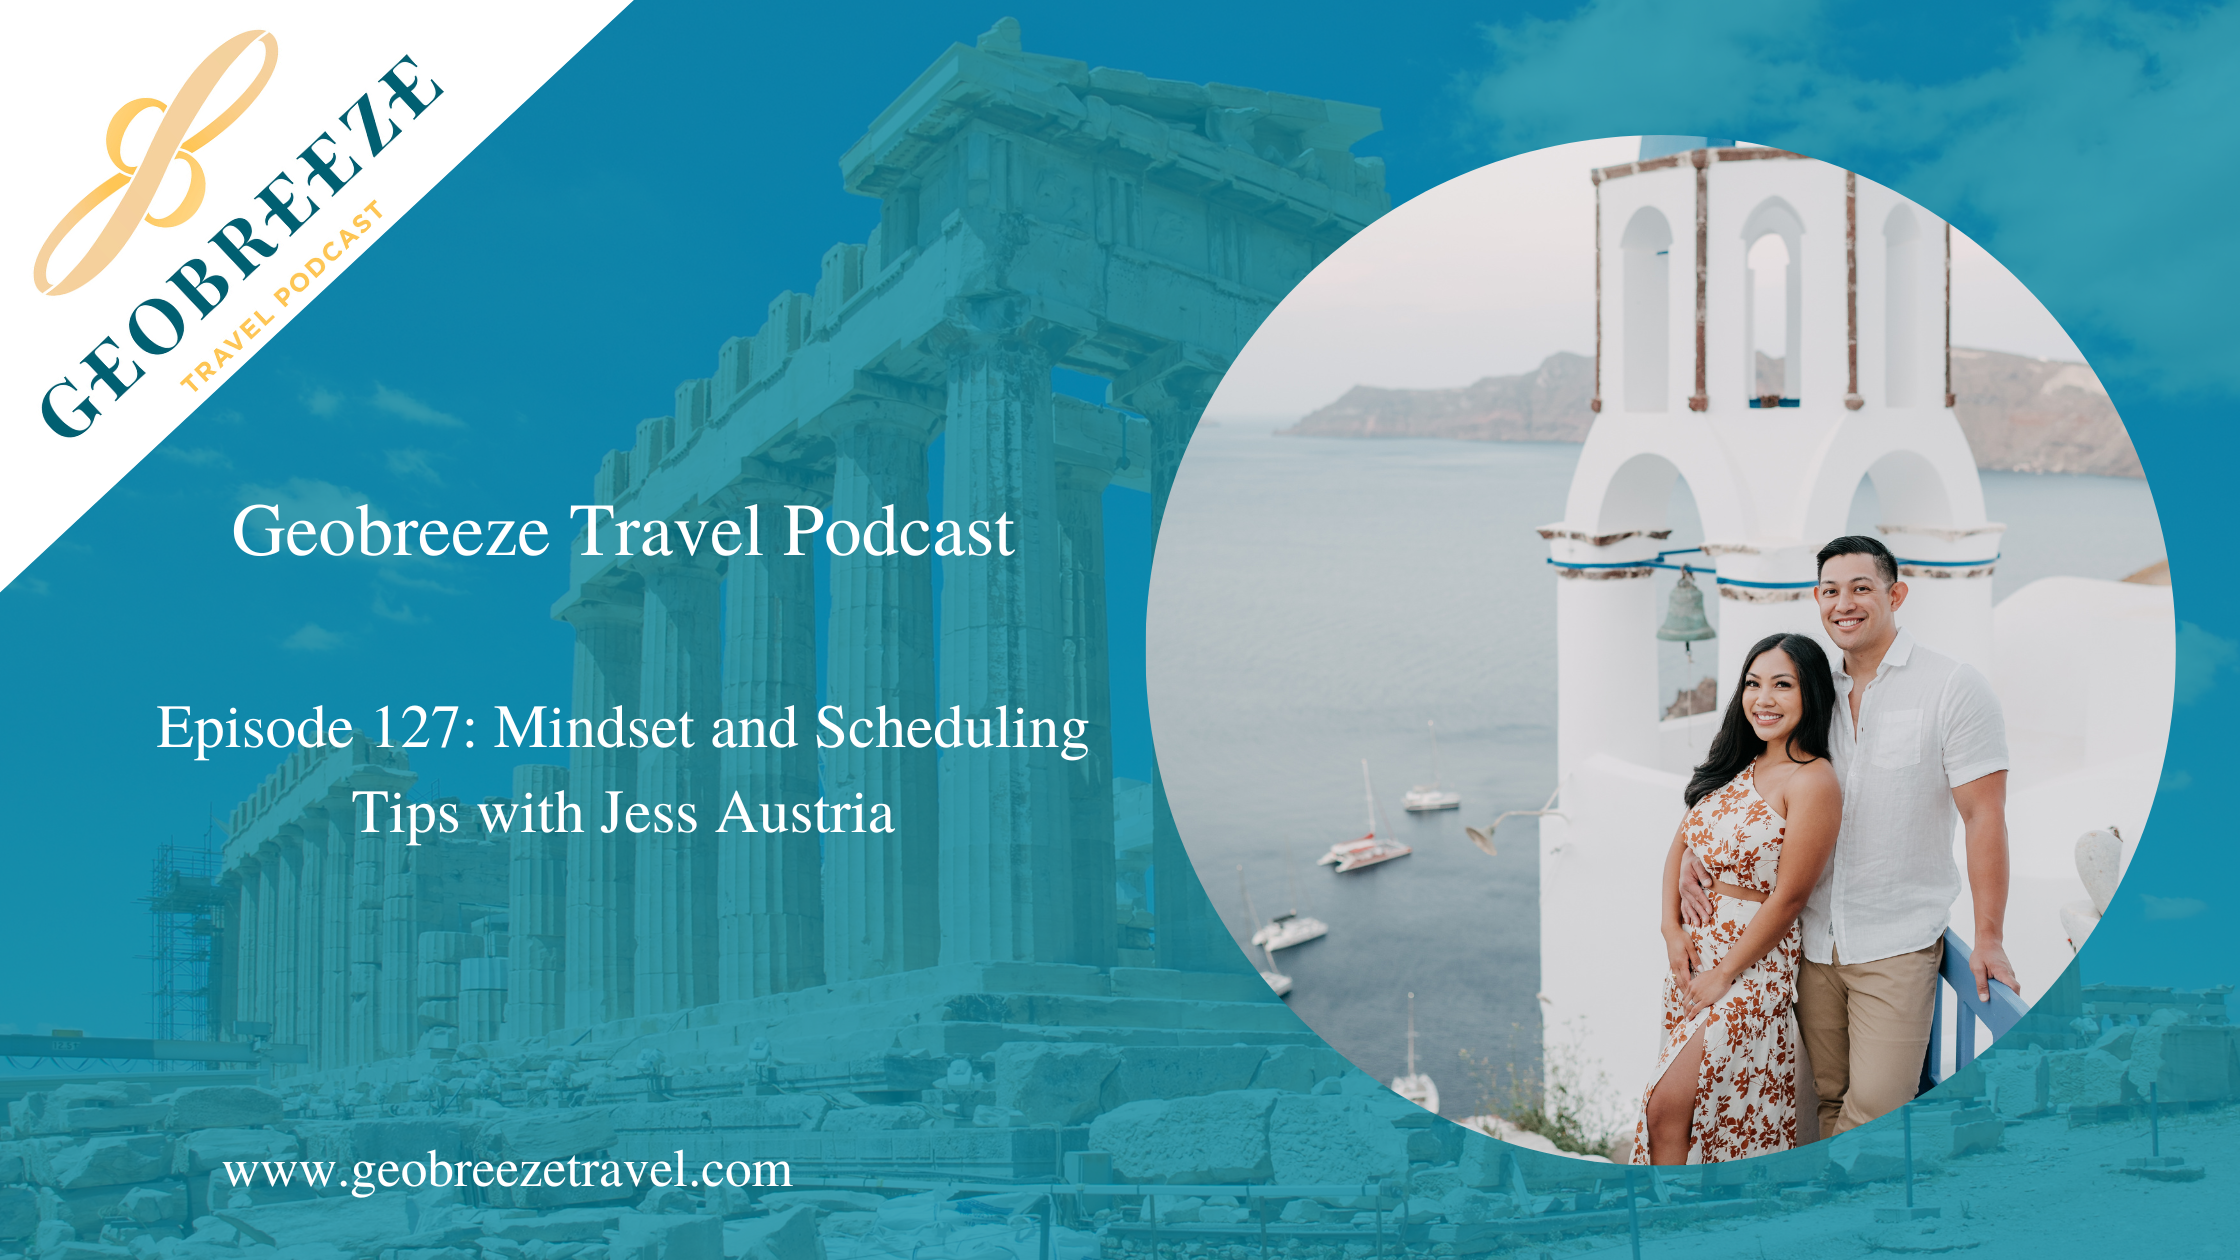 Episode 127: Mindset and Scheduling Tips with Jess Austria